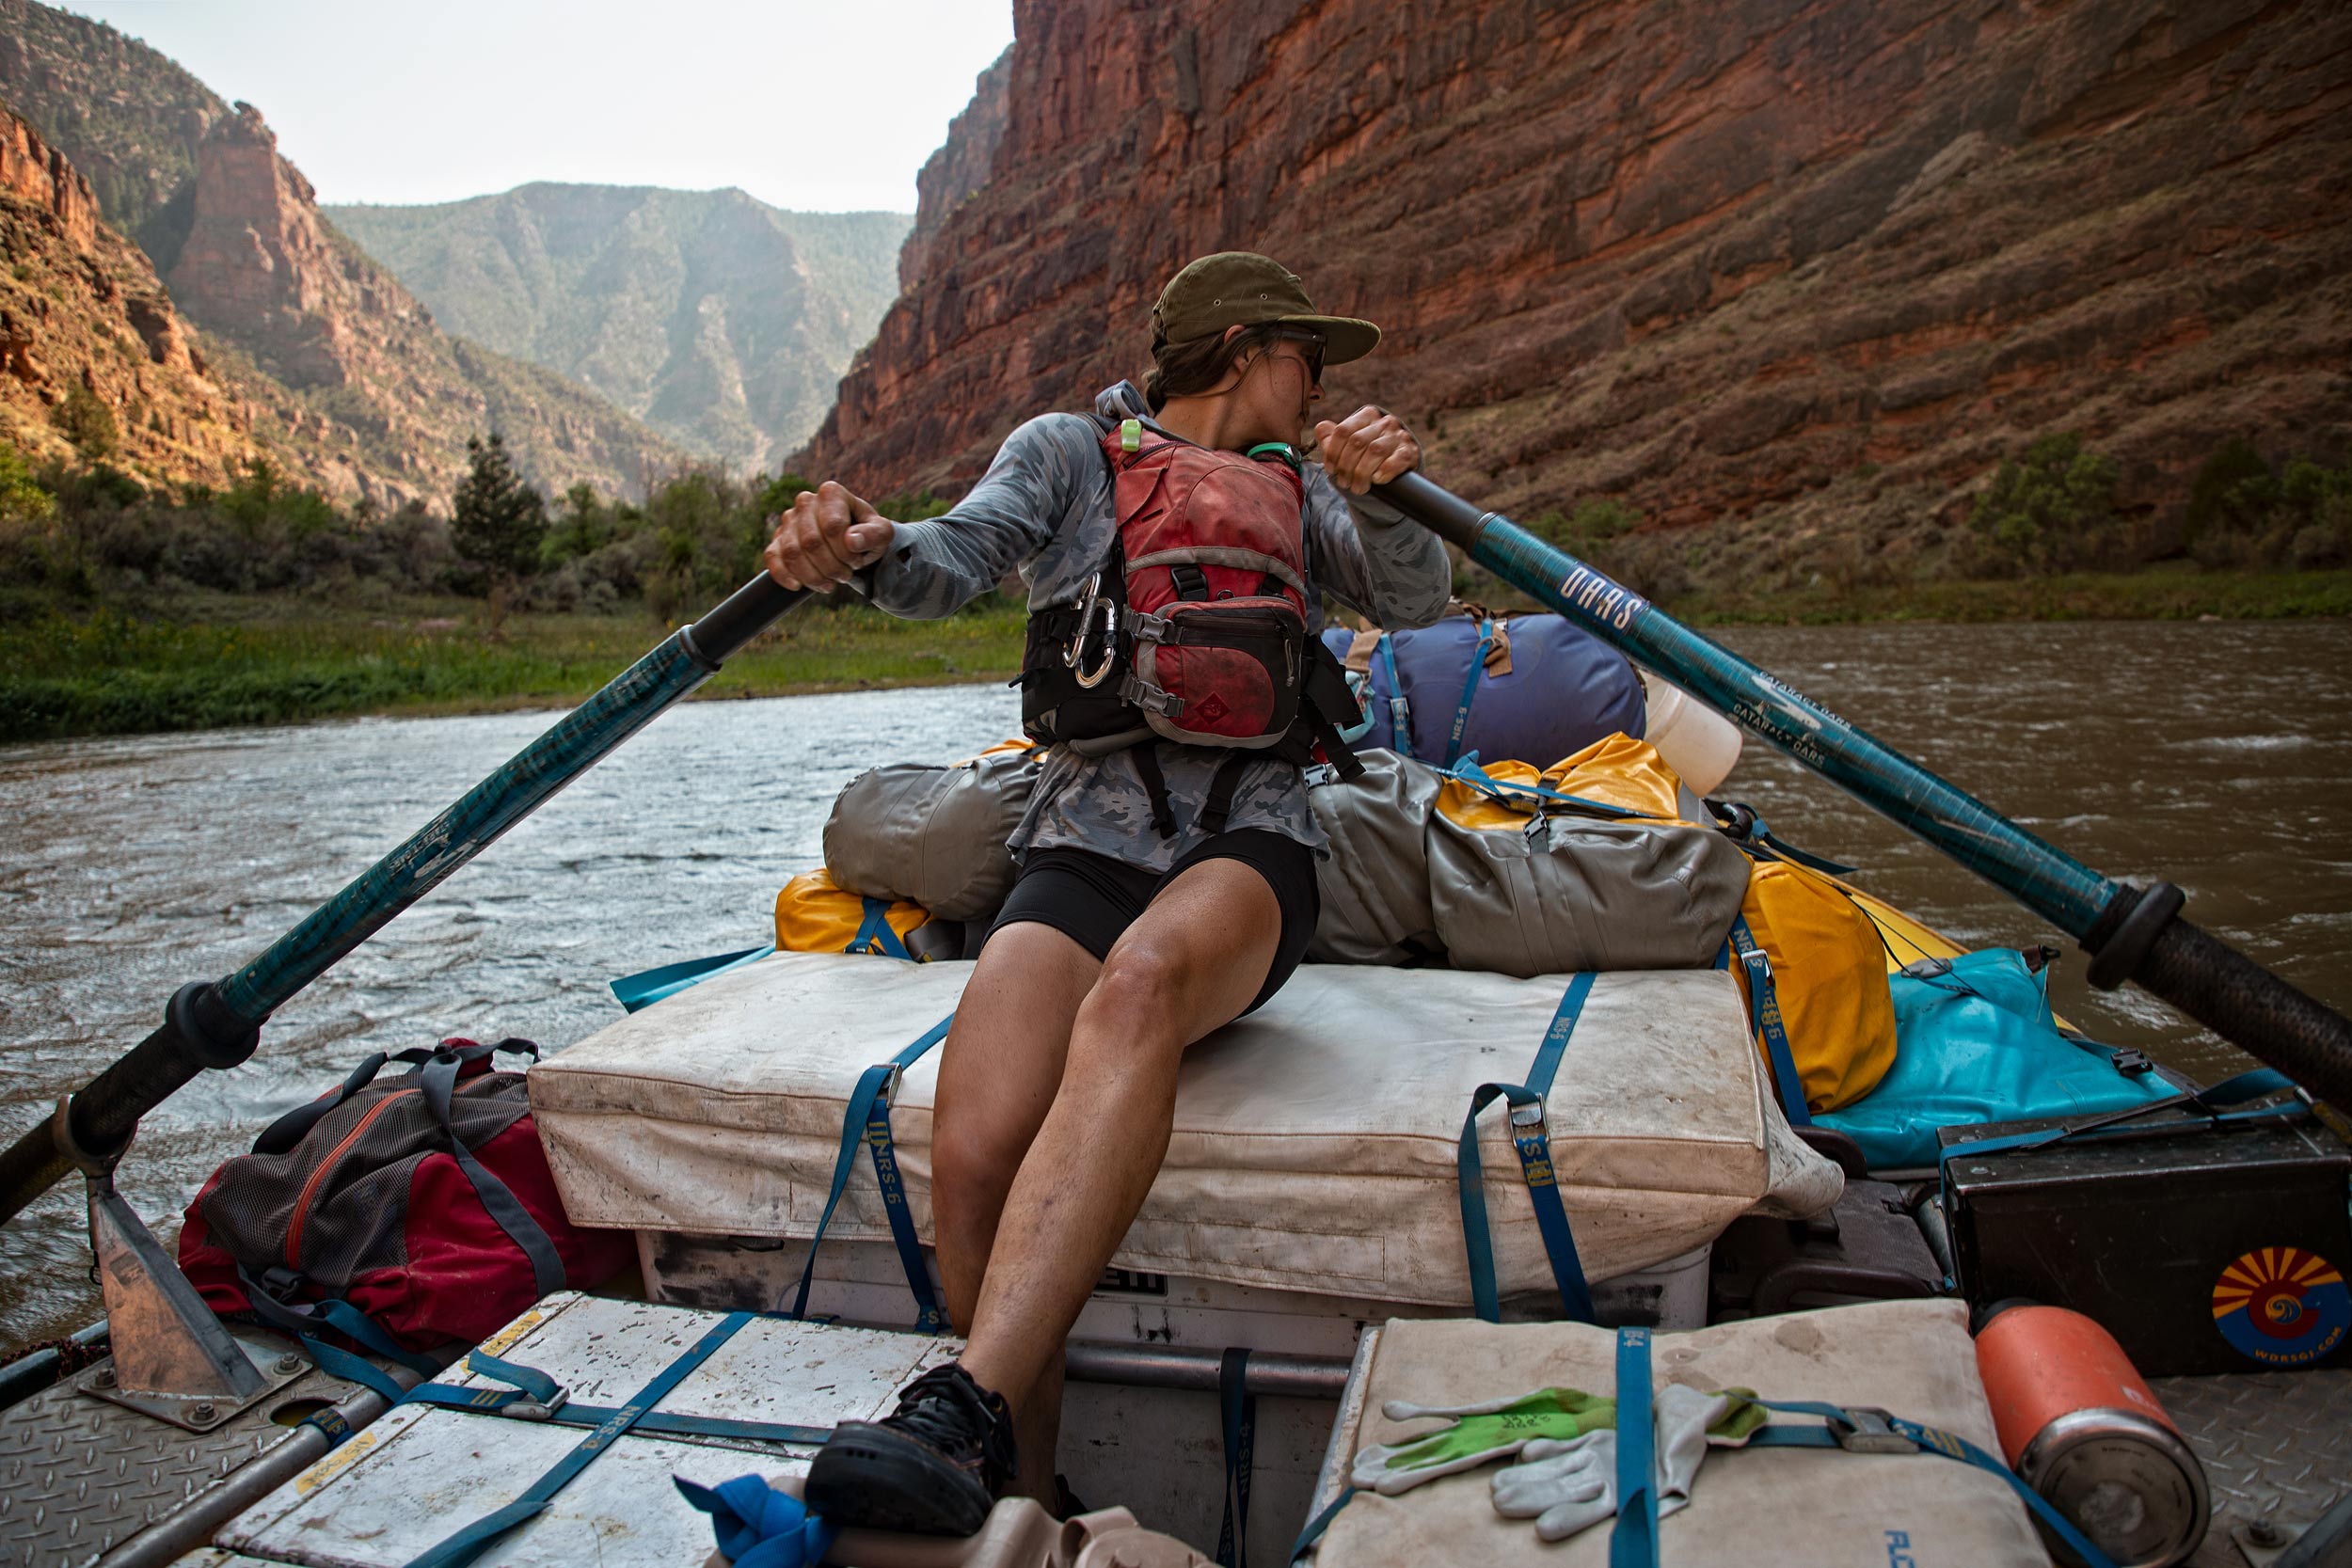 Location Photography Travel Outdoor Raft